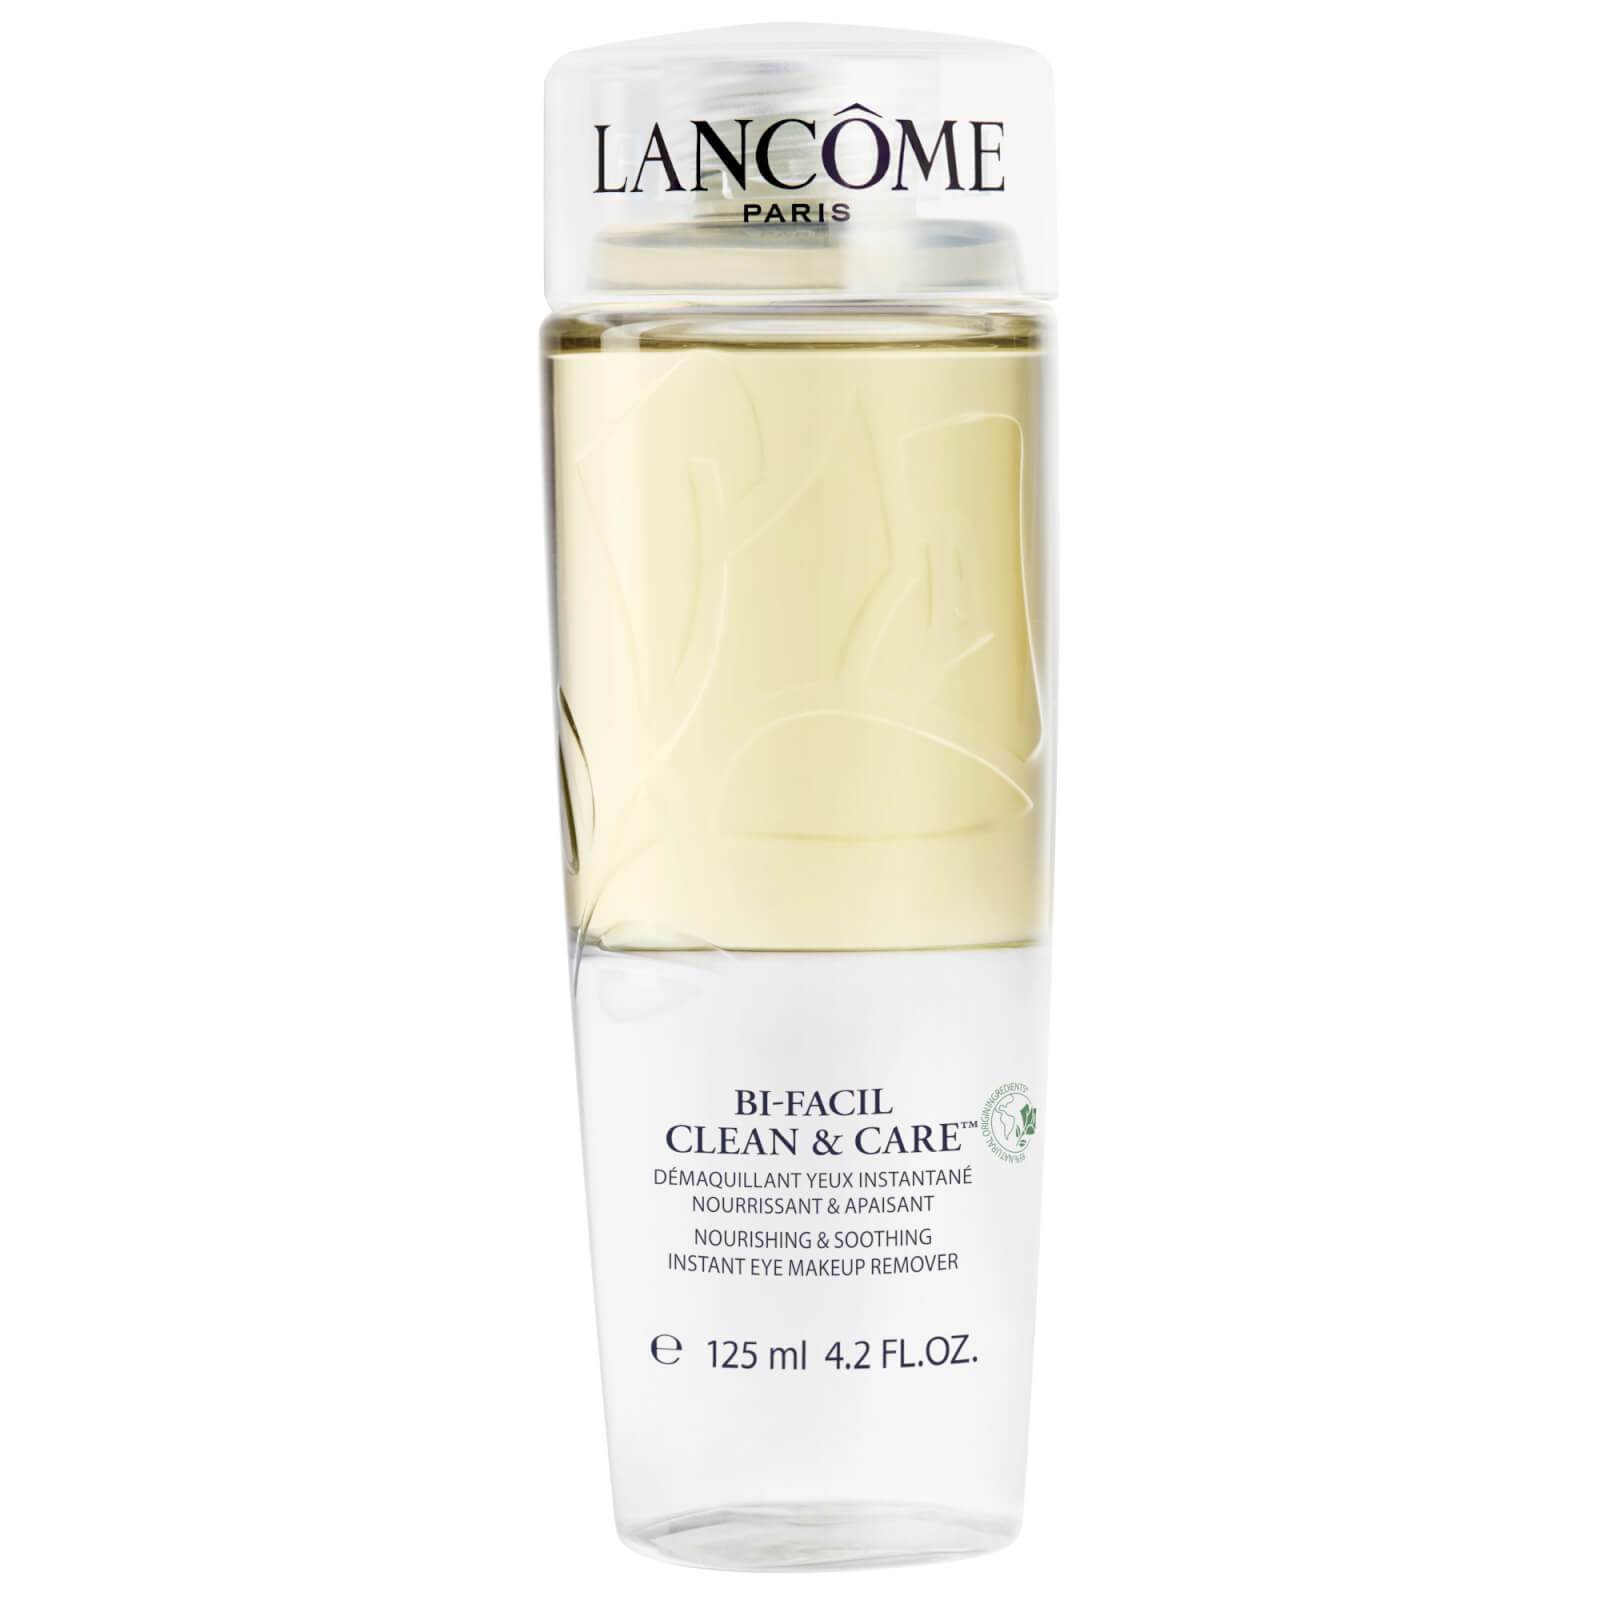 Image of Lancôme BI-Facil Clean and Care Nourishing and Soothing Instant Eye Makeup Remover 125ml